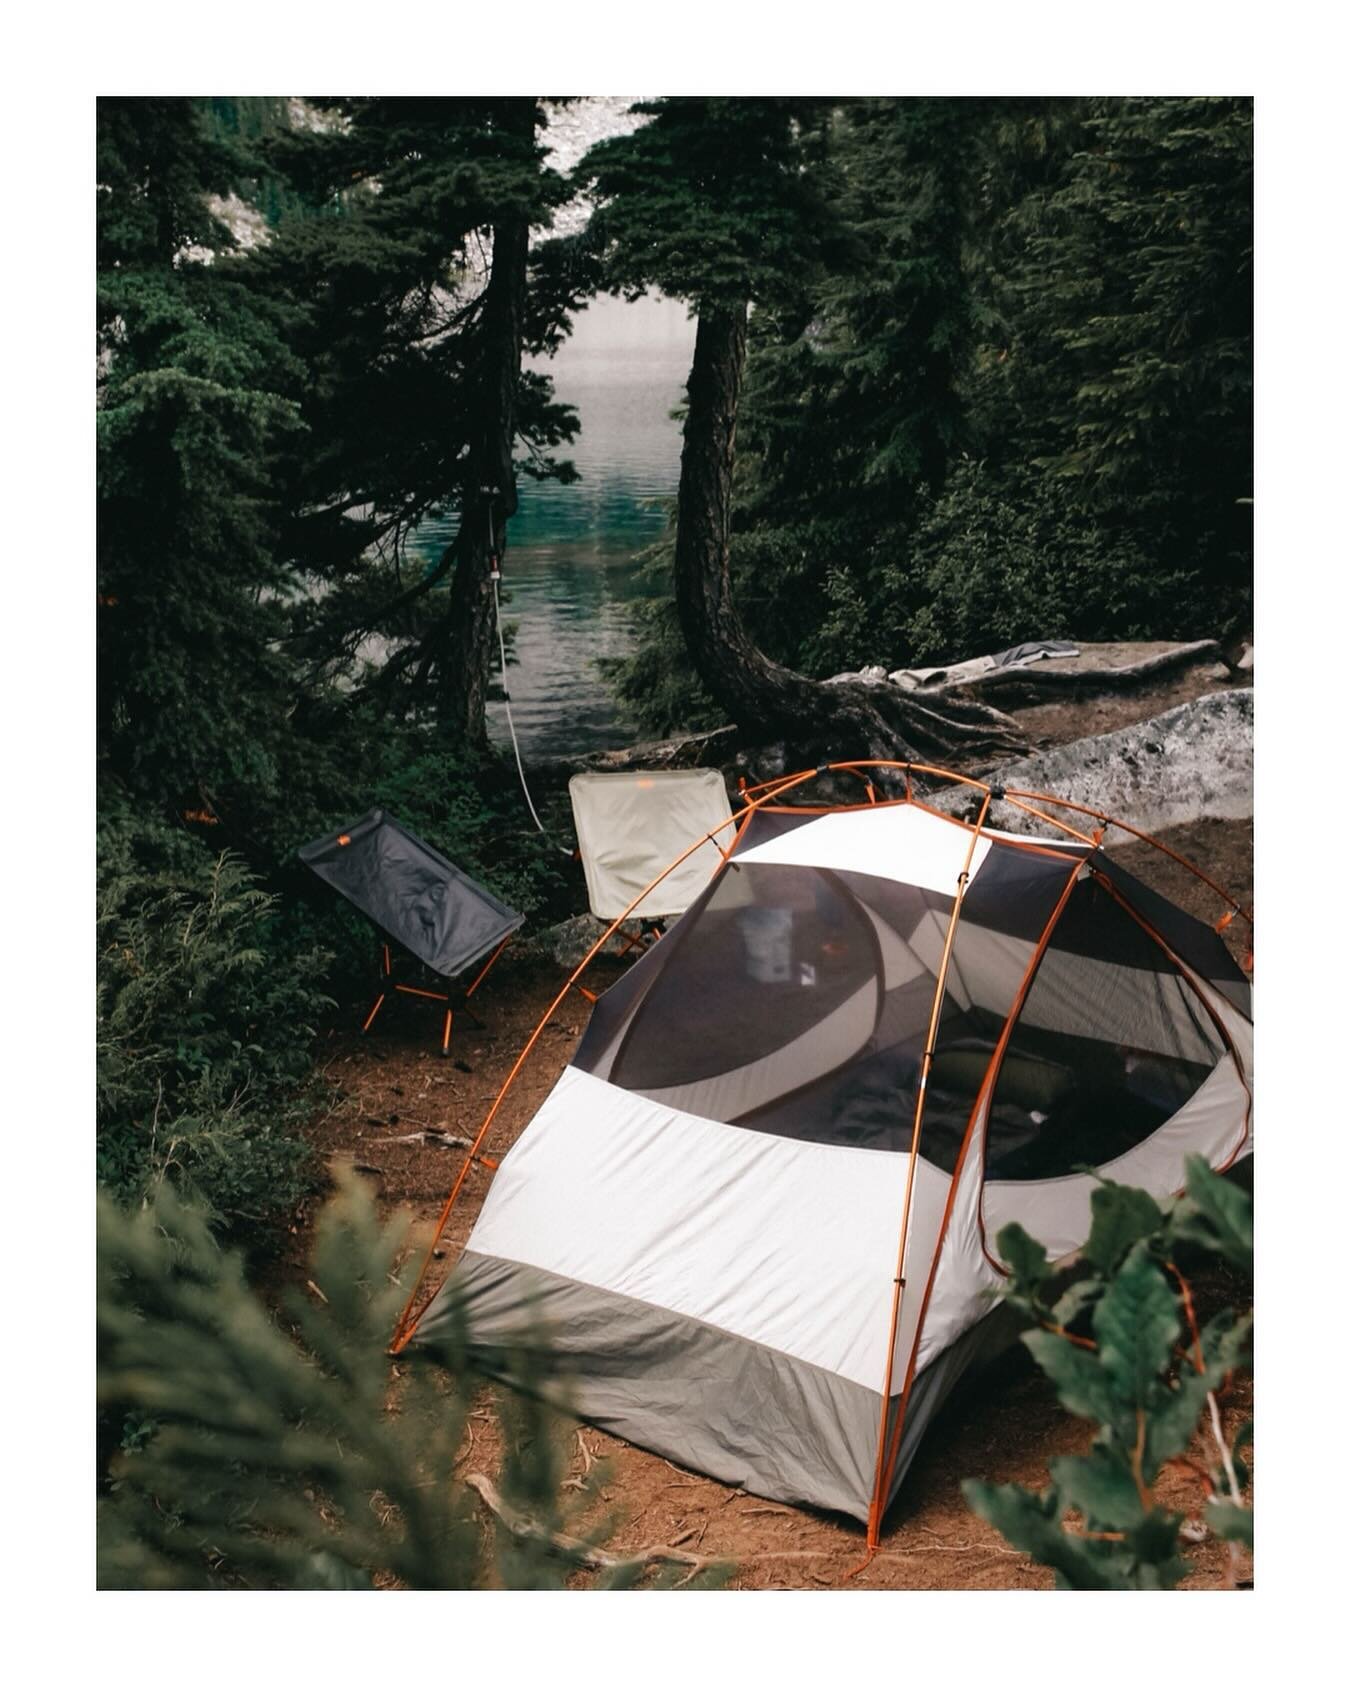 Longer, warmer days are ahead! I&rsquo;m looking forward to hiking Washington&rsquo;s best backpacking trails and discovering more camping gems like this one 🏕️